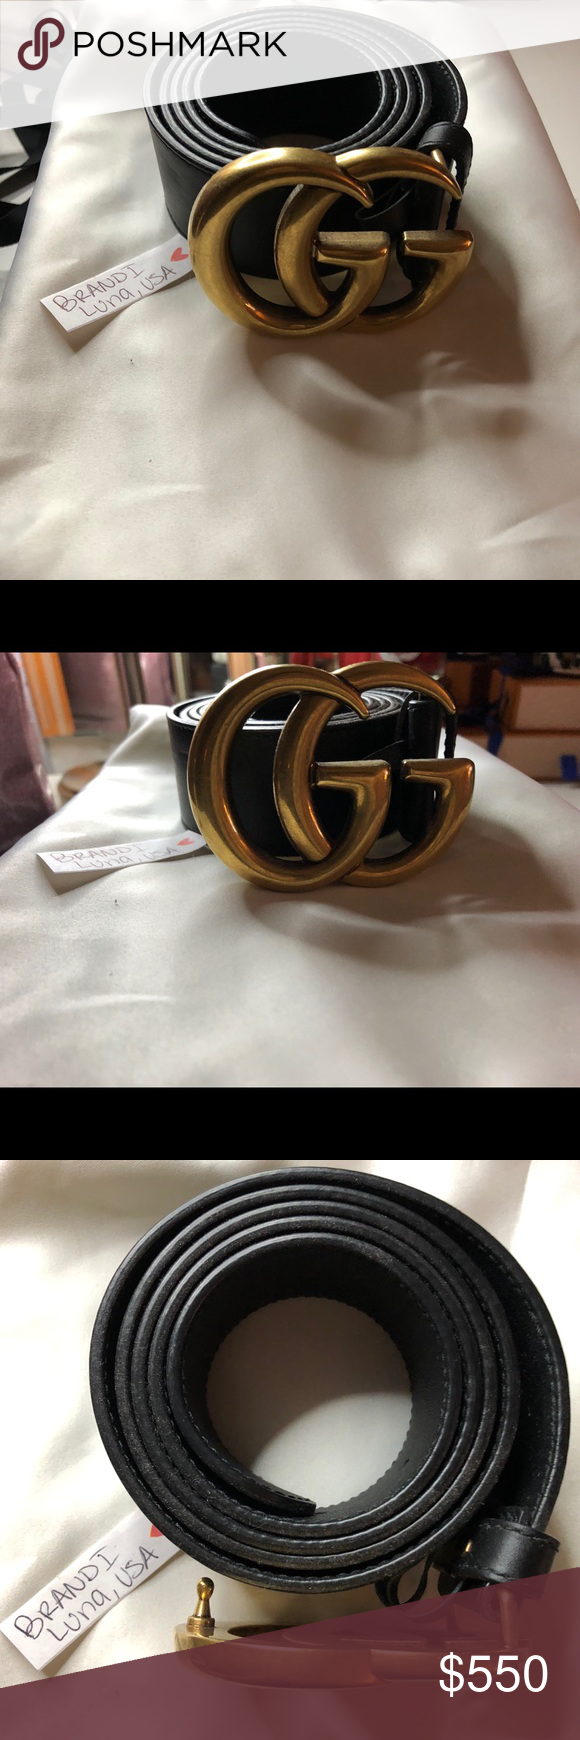 How To Authenticate Gucci Belt - mfasefest